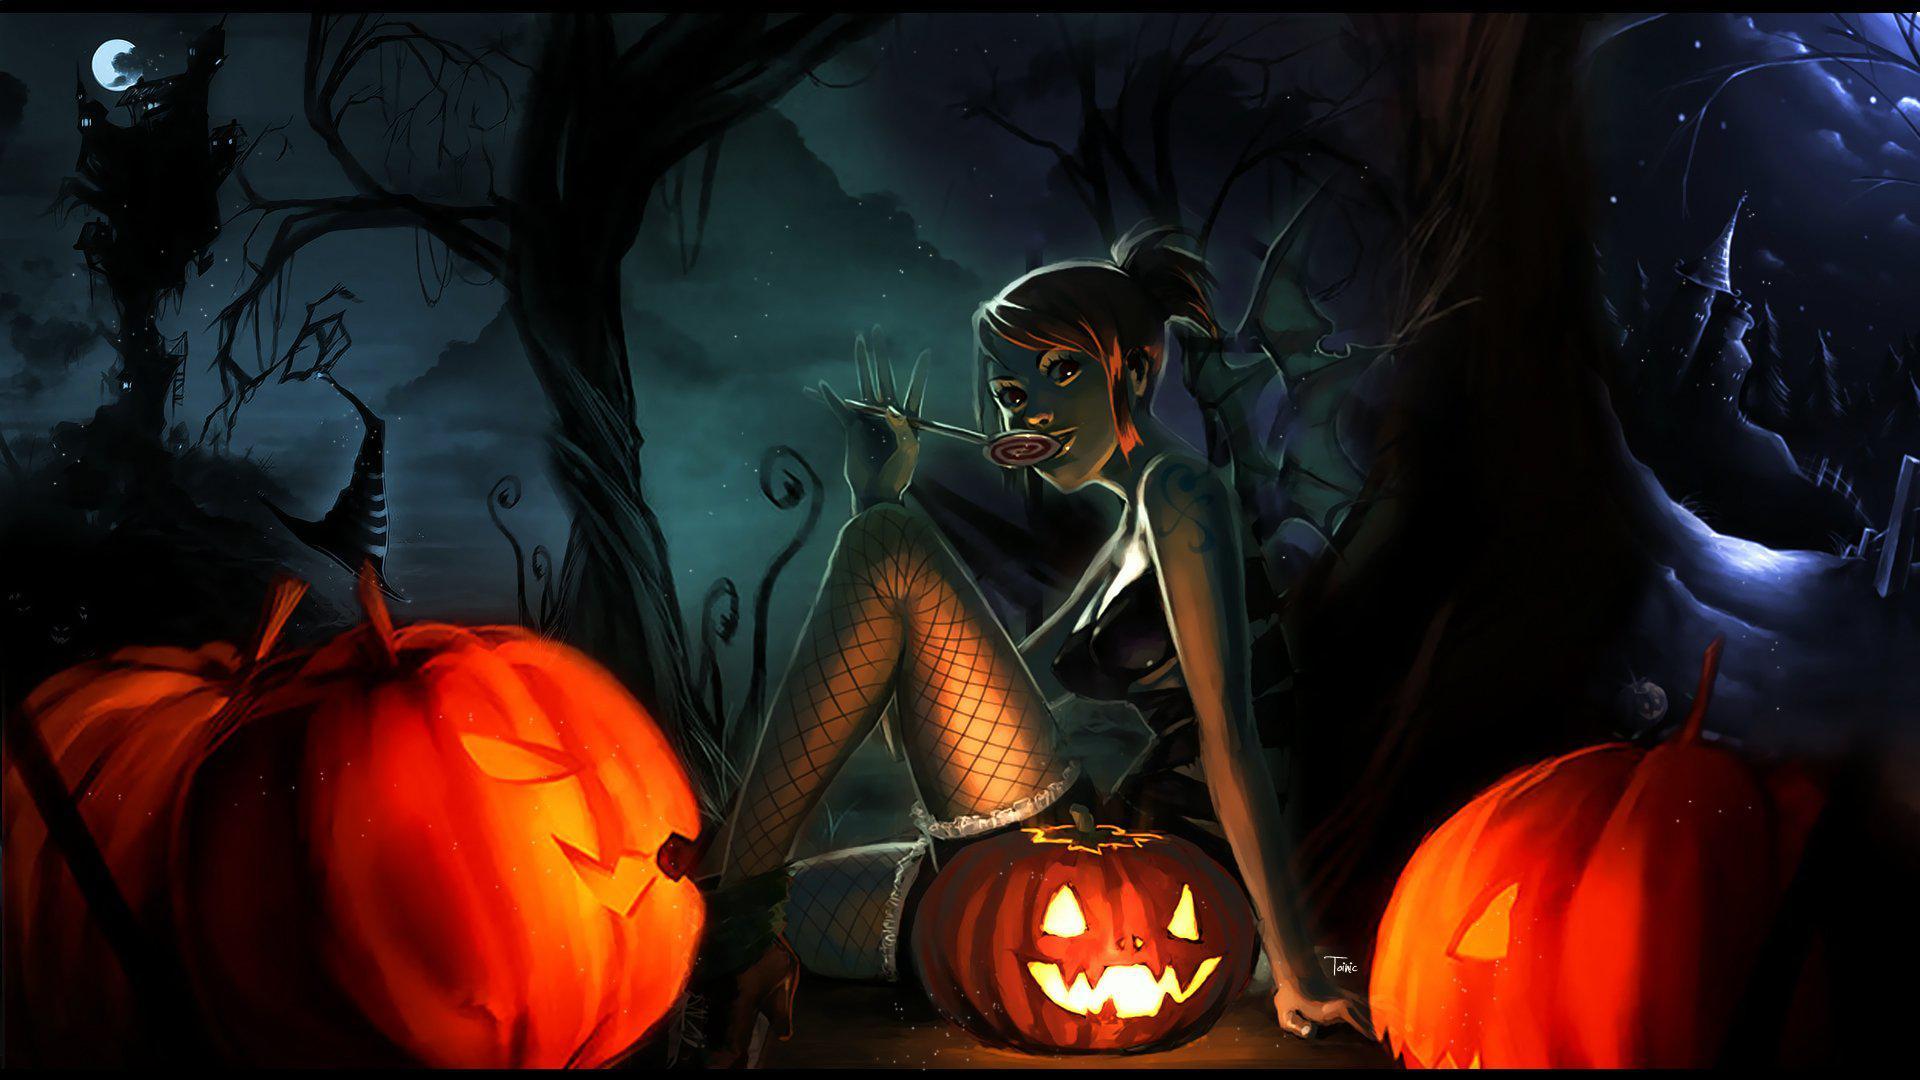 Scary and Creepy Halloween Wallpaper For Desktops, iPhone 2017